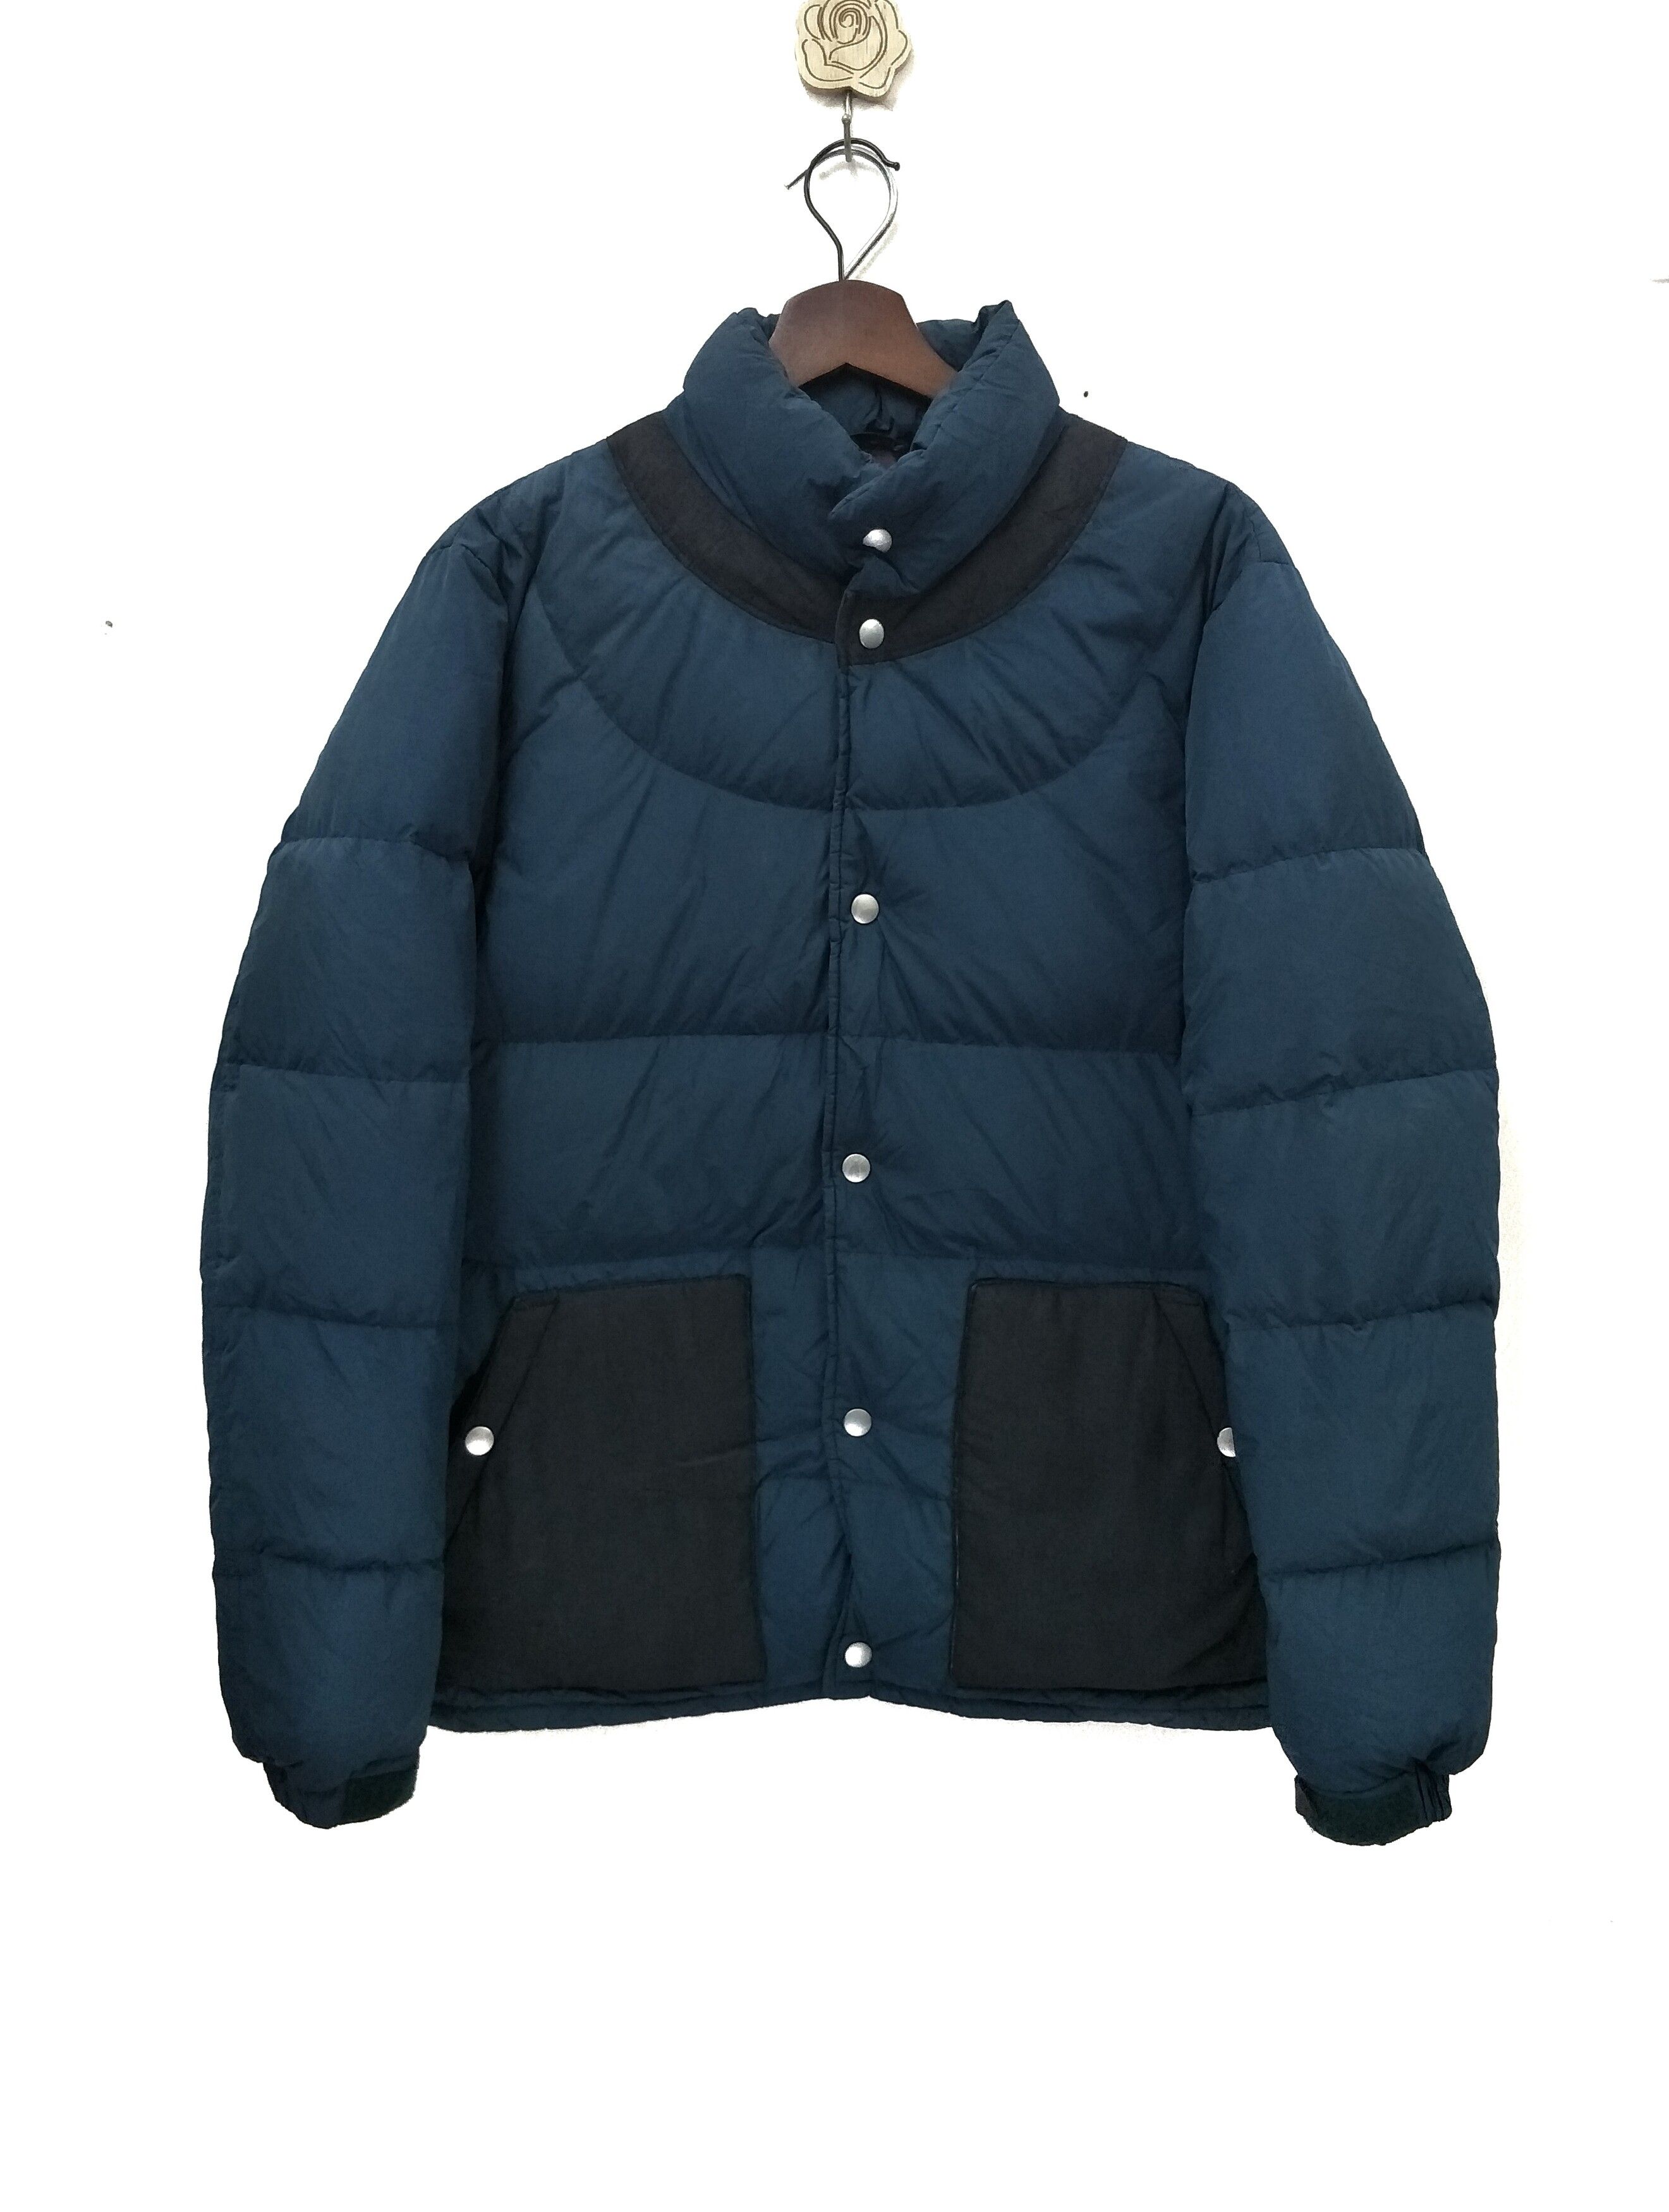 Undercover x Uniqlo Puffer Down Jacket - 1